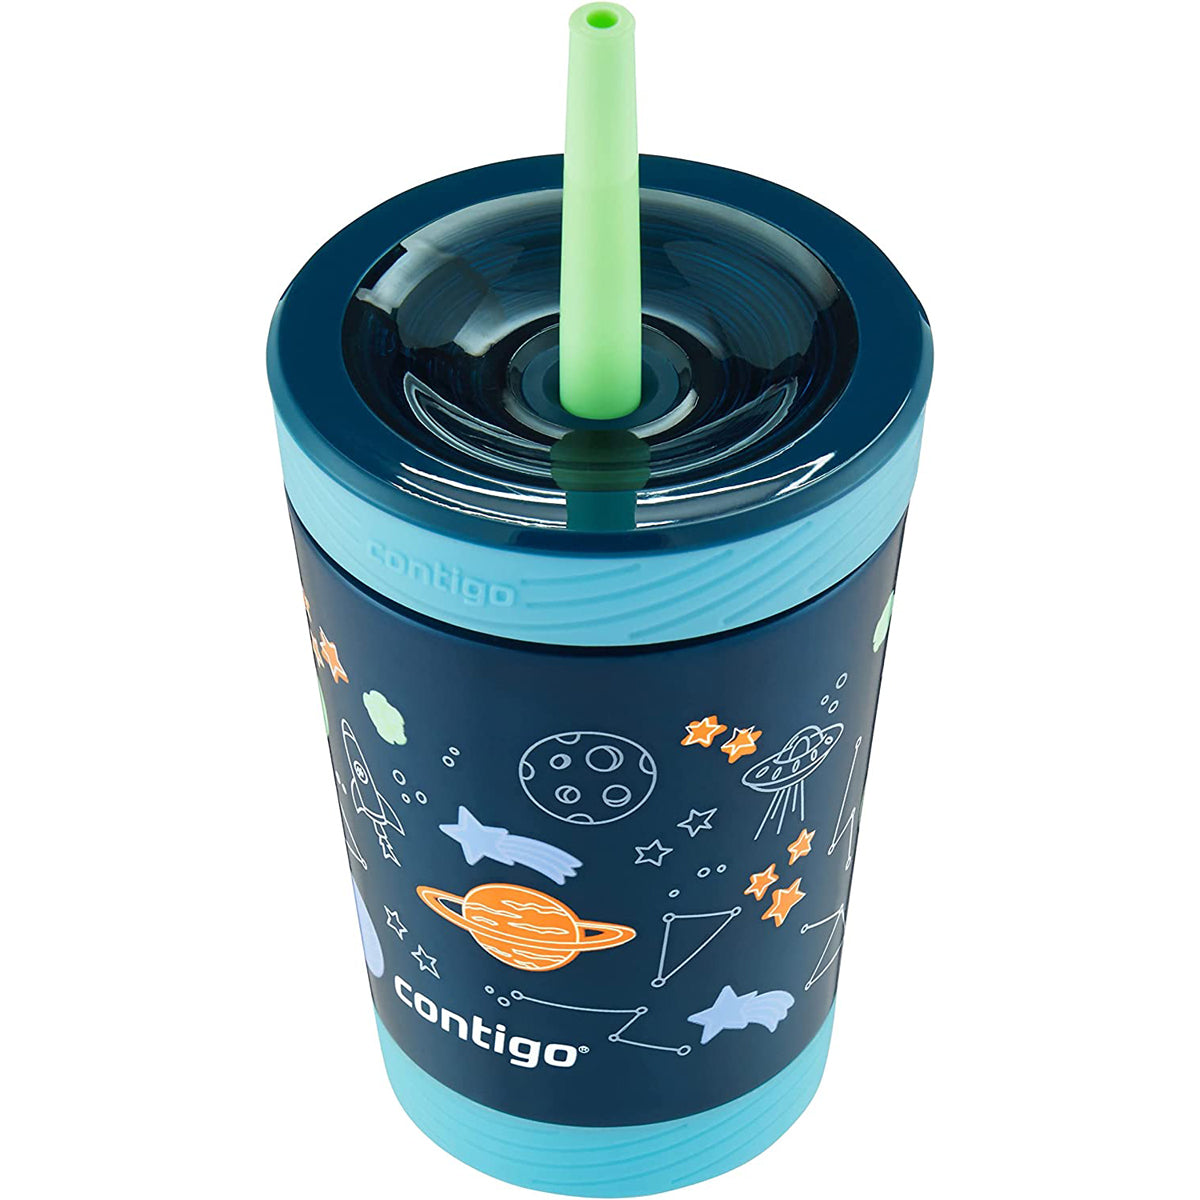 Contigo 12 oz. Kid's Spill-Proof Insulated Stainless Steel Tumbler